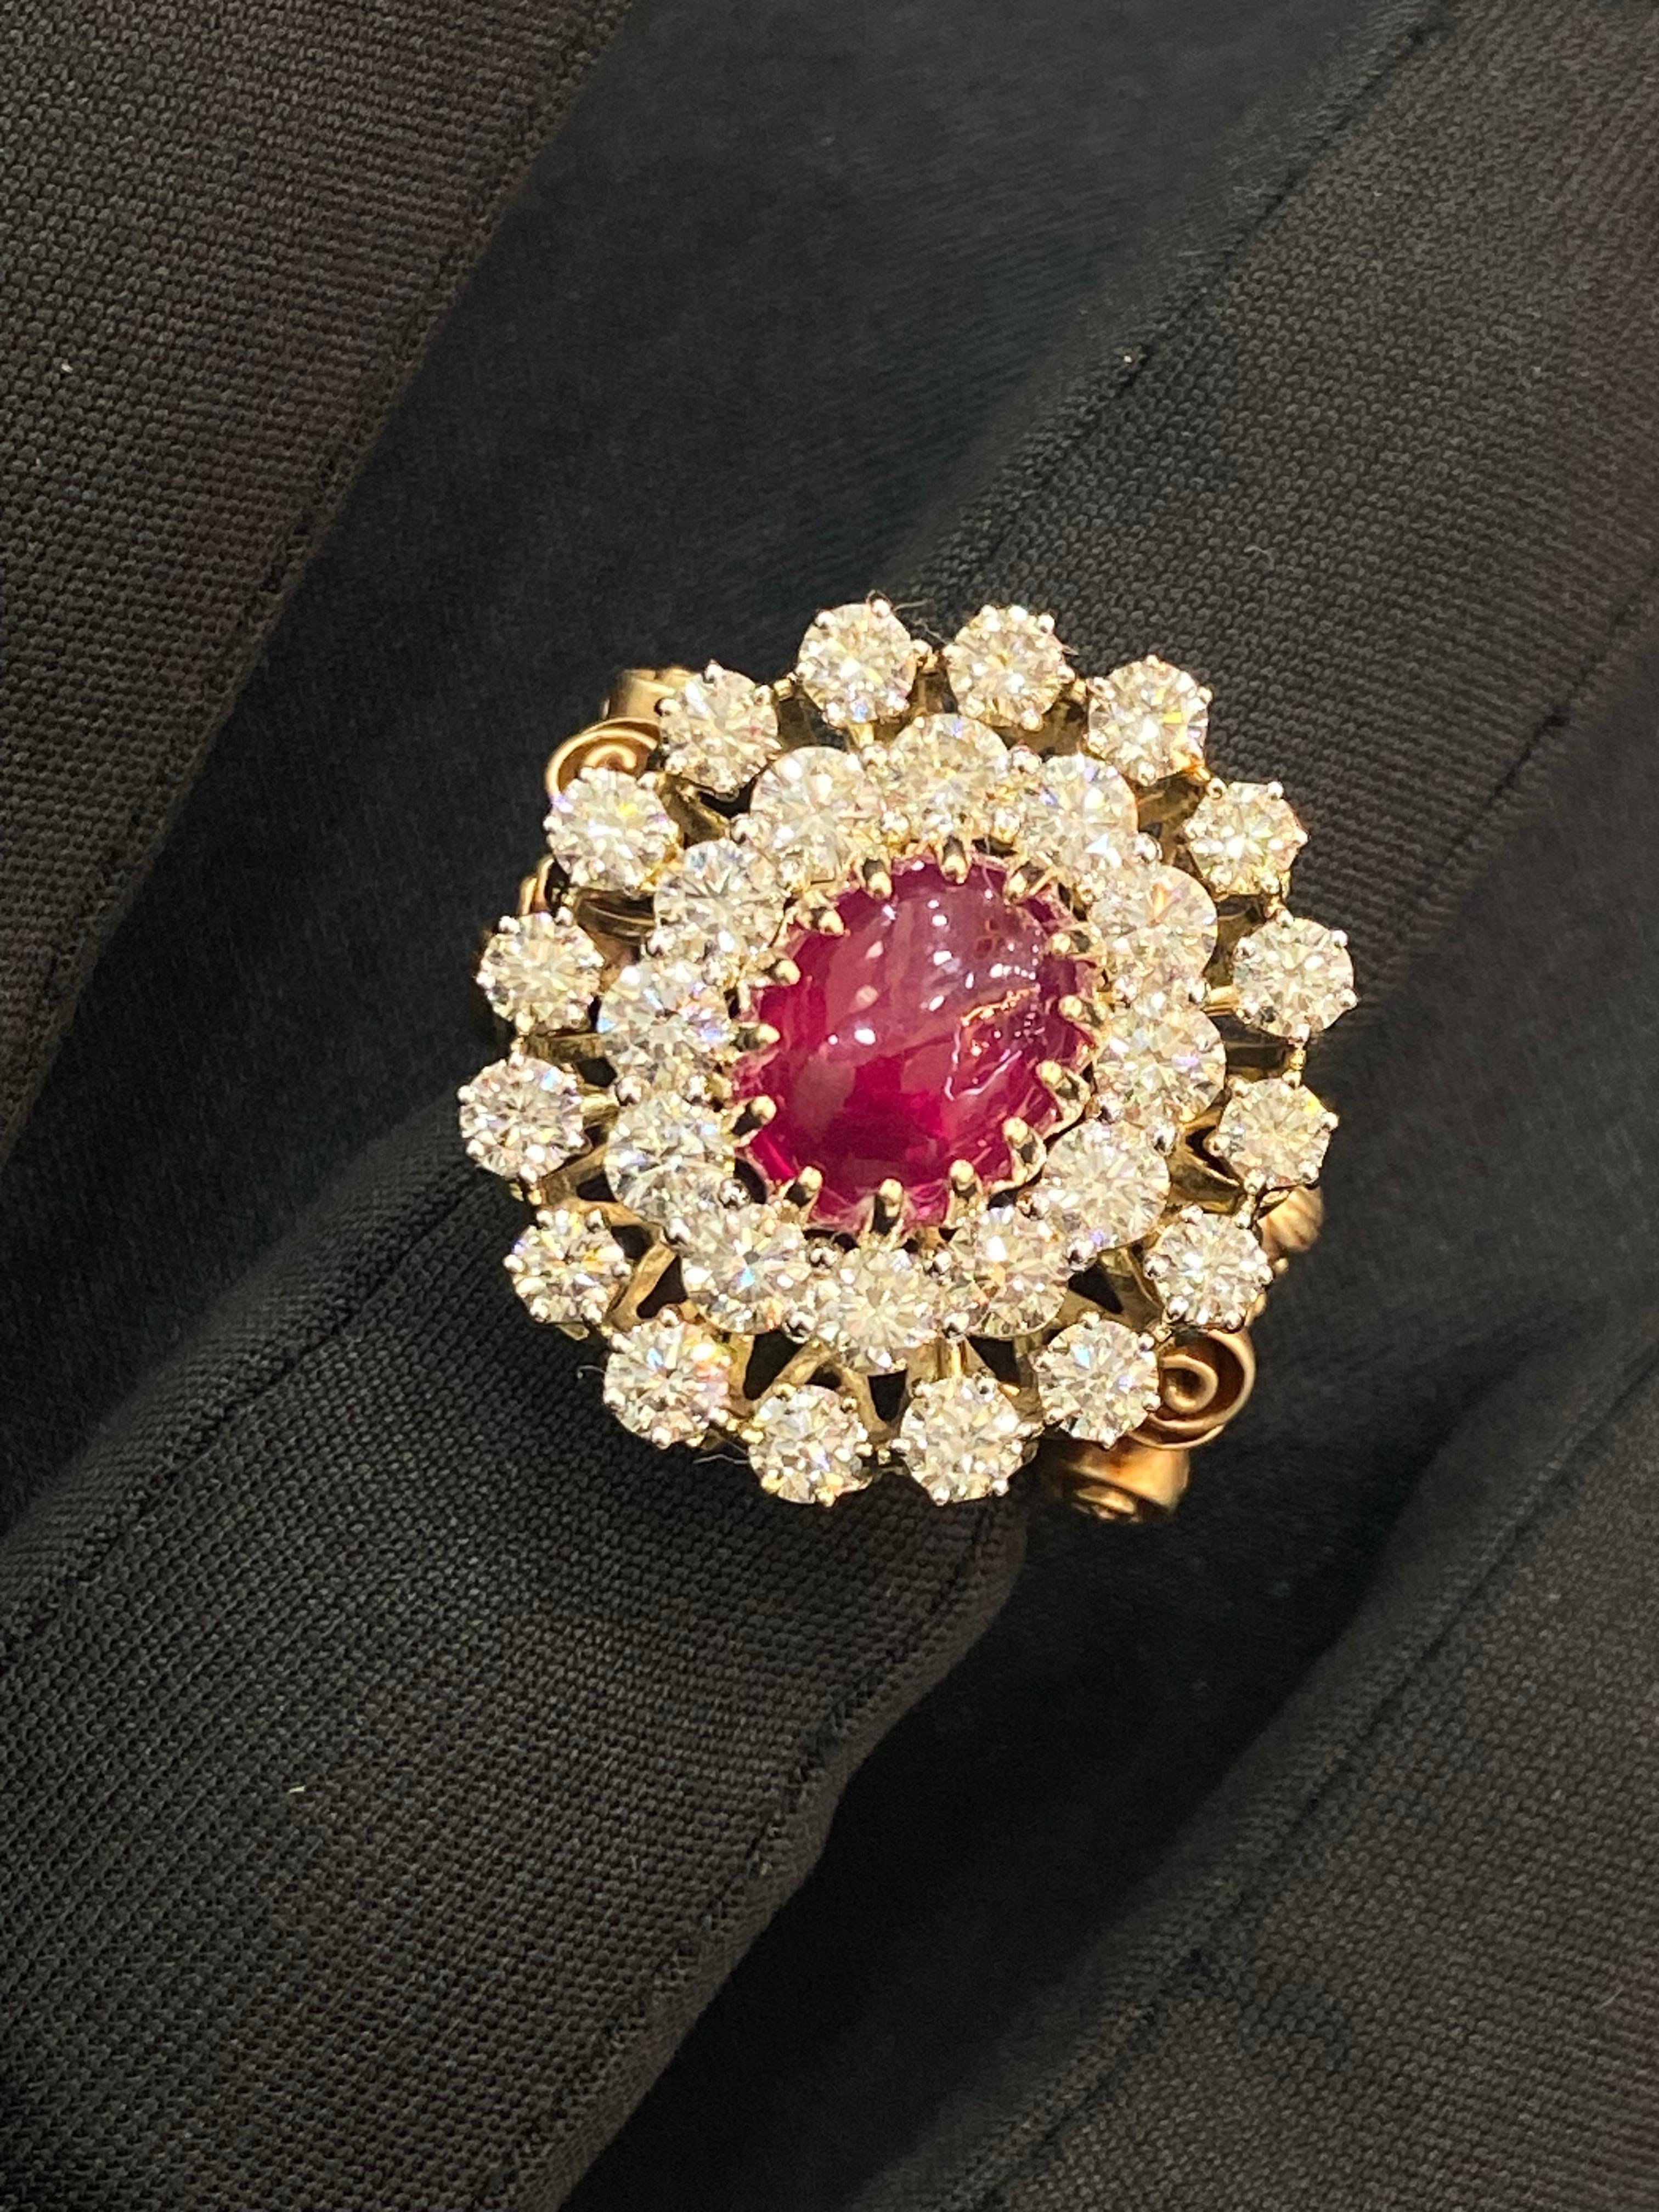 Indulge in the allure of luxury with our exclusive 3.25 carat diamond and 4.02 carat ruby ring, where every exquisite detail shines like sparkling diamonds and gold. Make it yours and embrace the brilliance of all things divine!

Specifications :